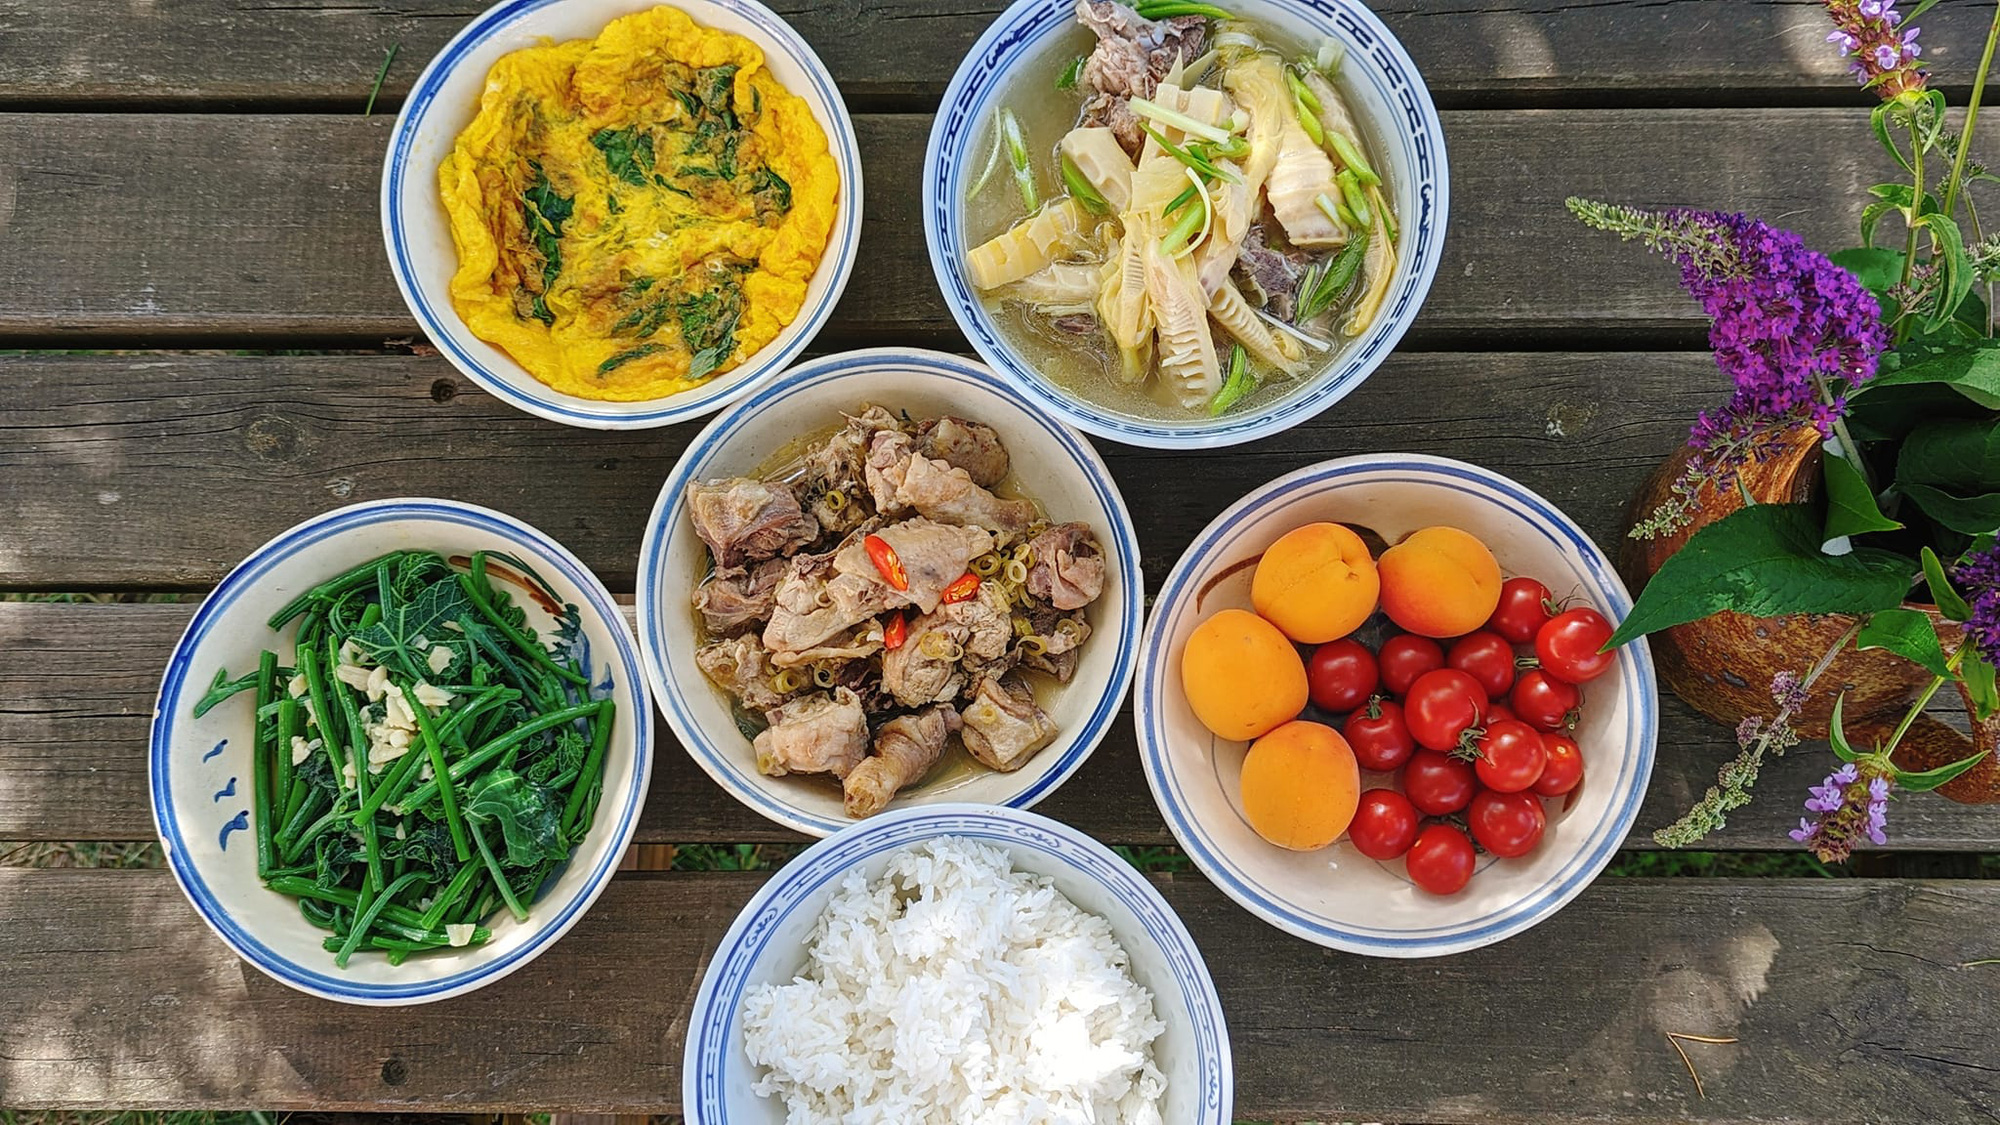 A meal containing bamboo shoot and bone soup, fried eggs with basil leaves, chayote vines stir-fried with garlic, and chicken stir-fried with lemongrass and chili prepared by Do Thuy Linh in France. Photo: Supplied